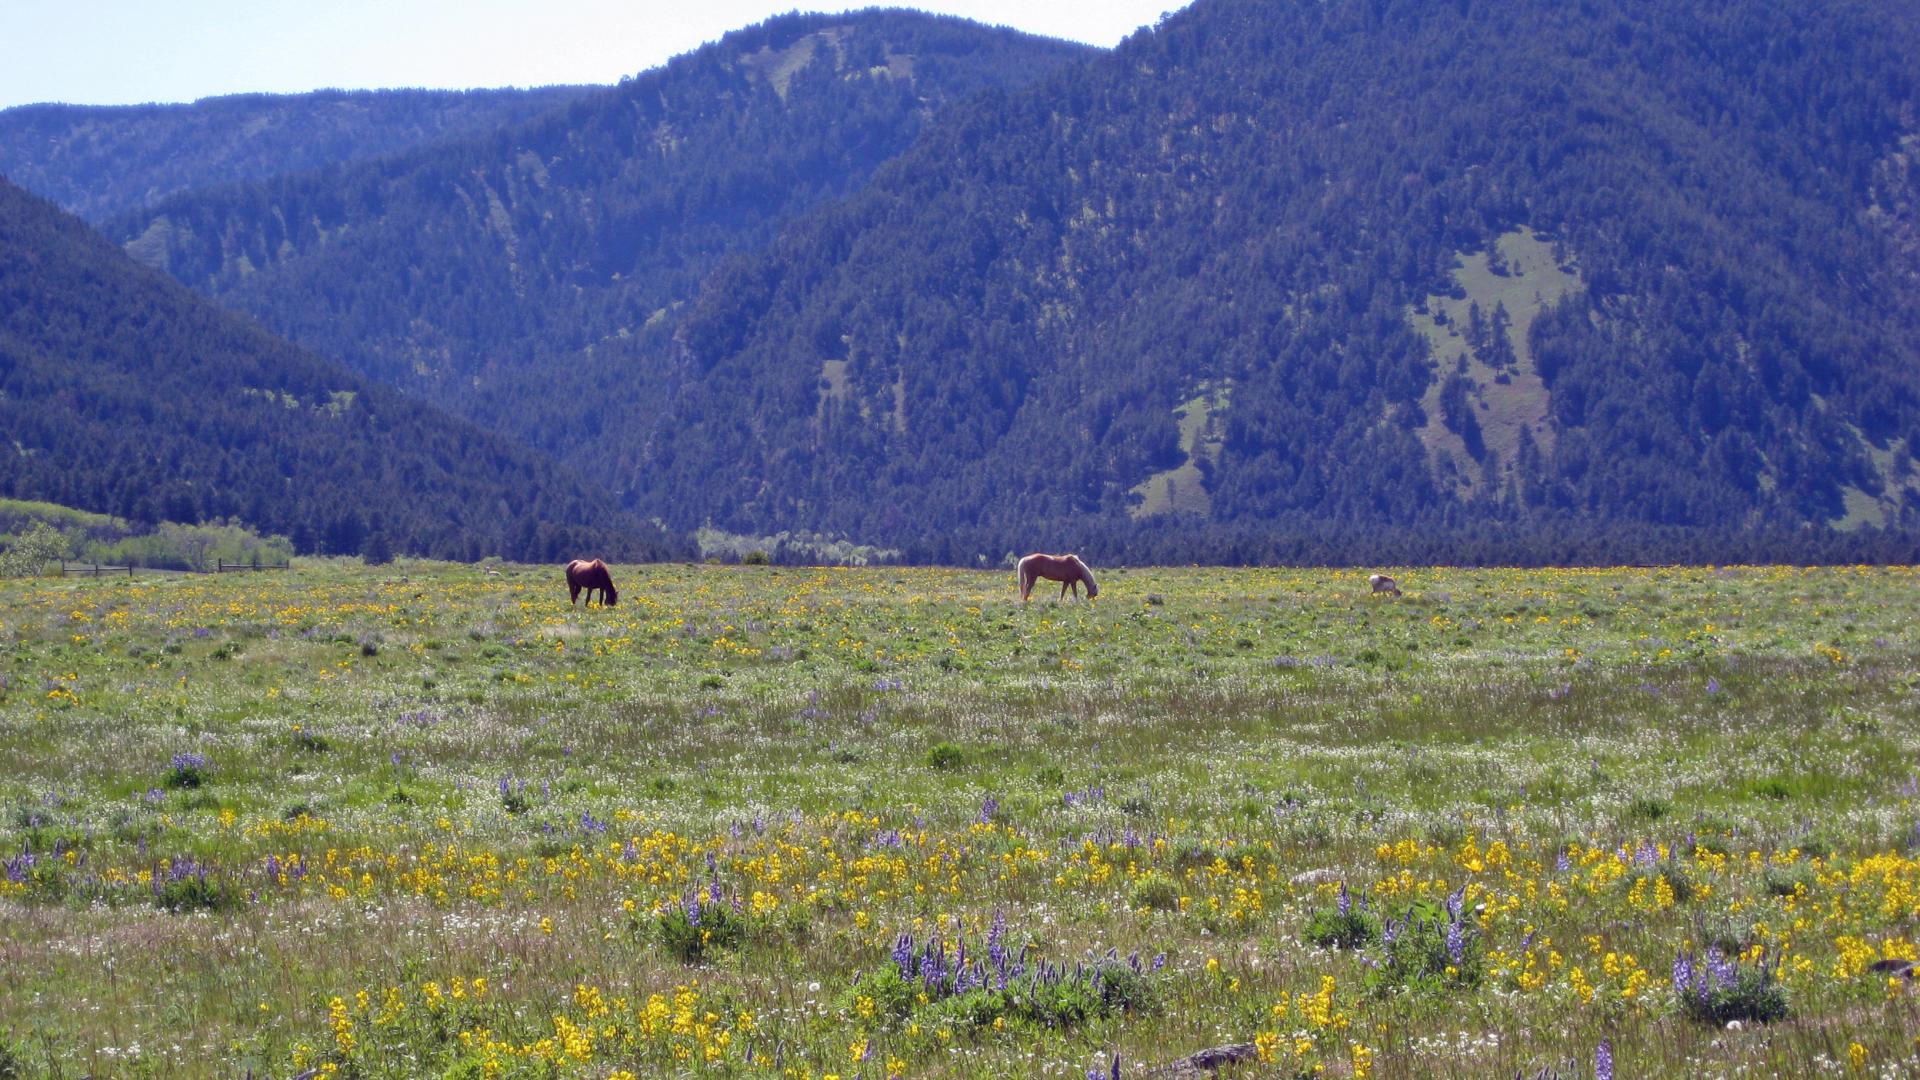 Horses and antelope grazing